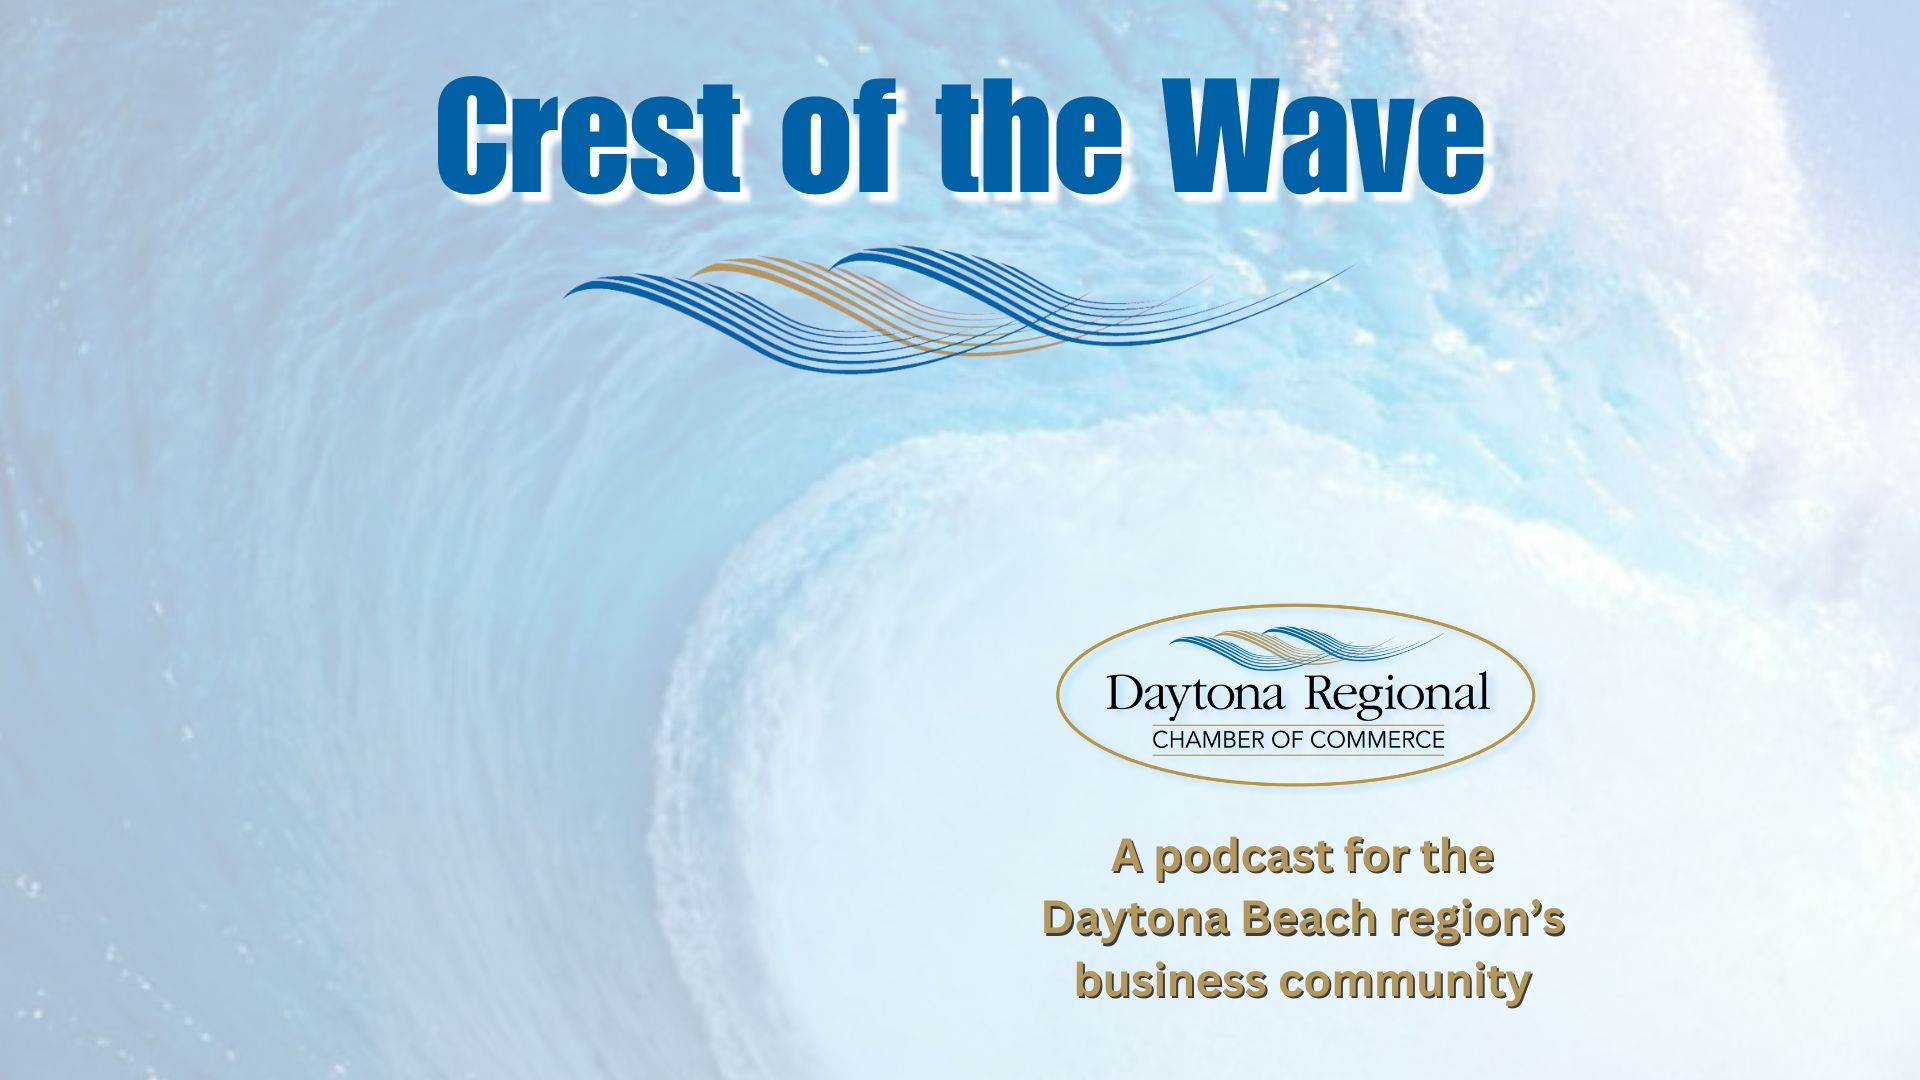 Crest of the Wave - A podcast for the Daytona Beach region's business community